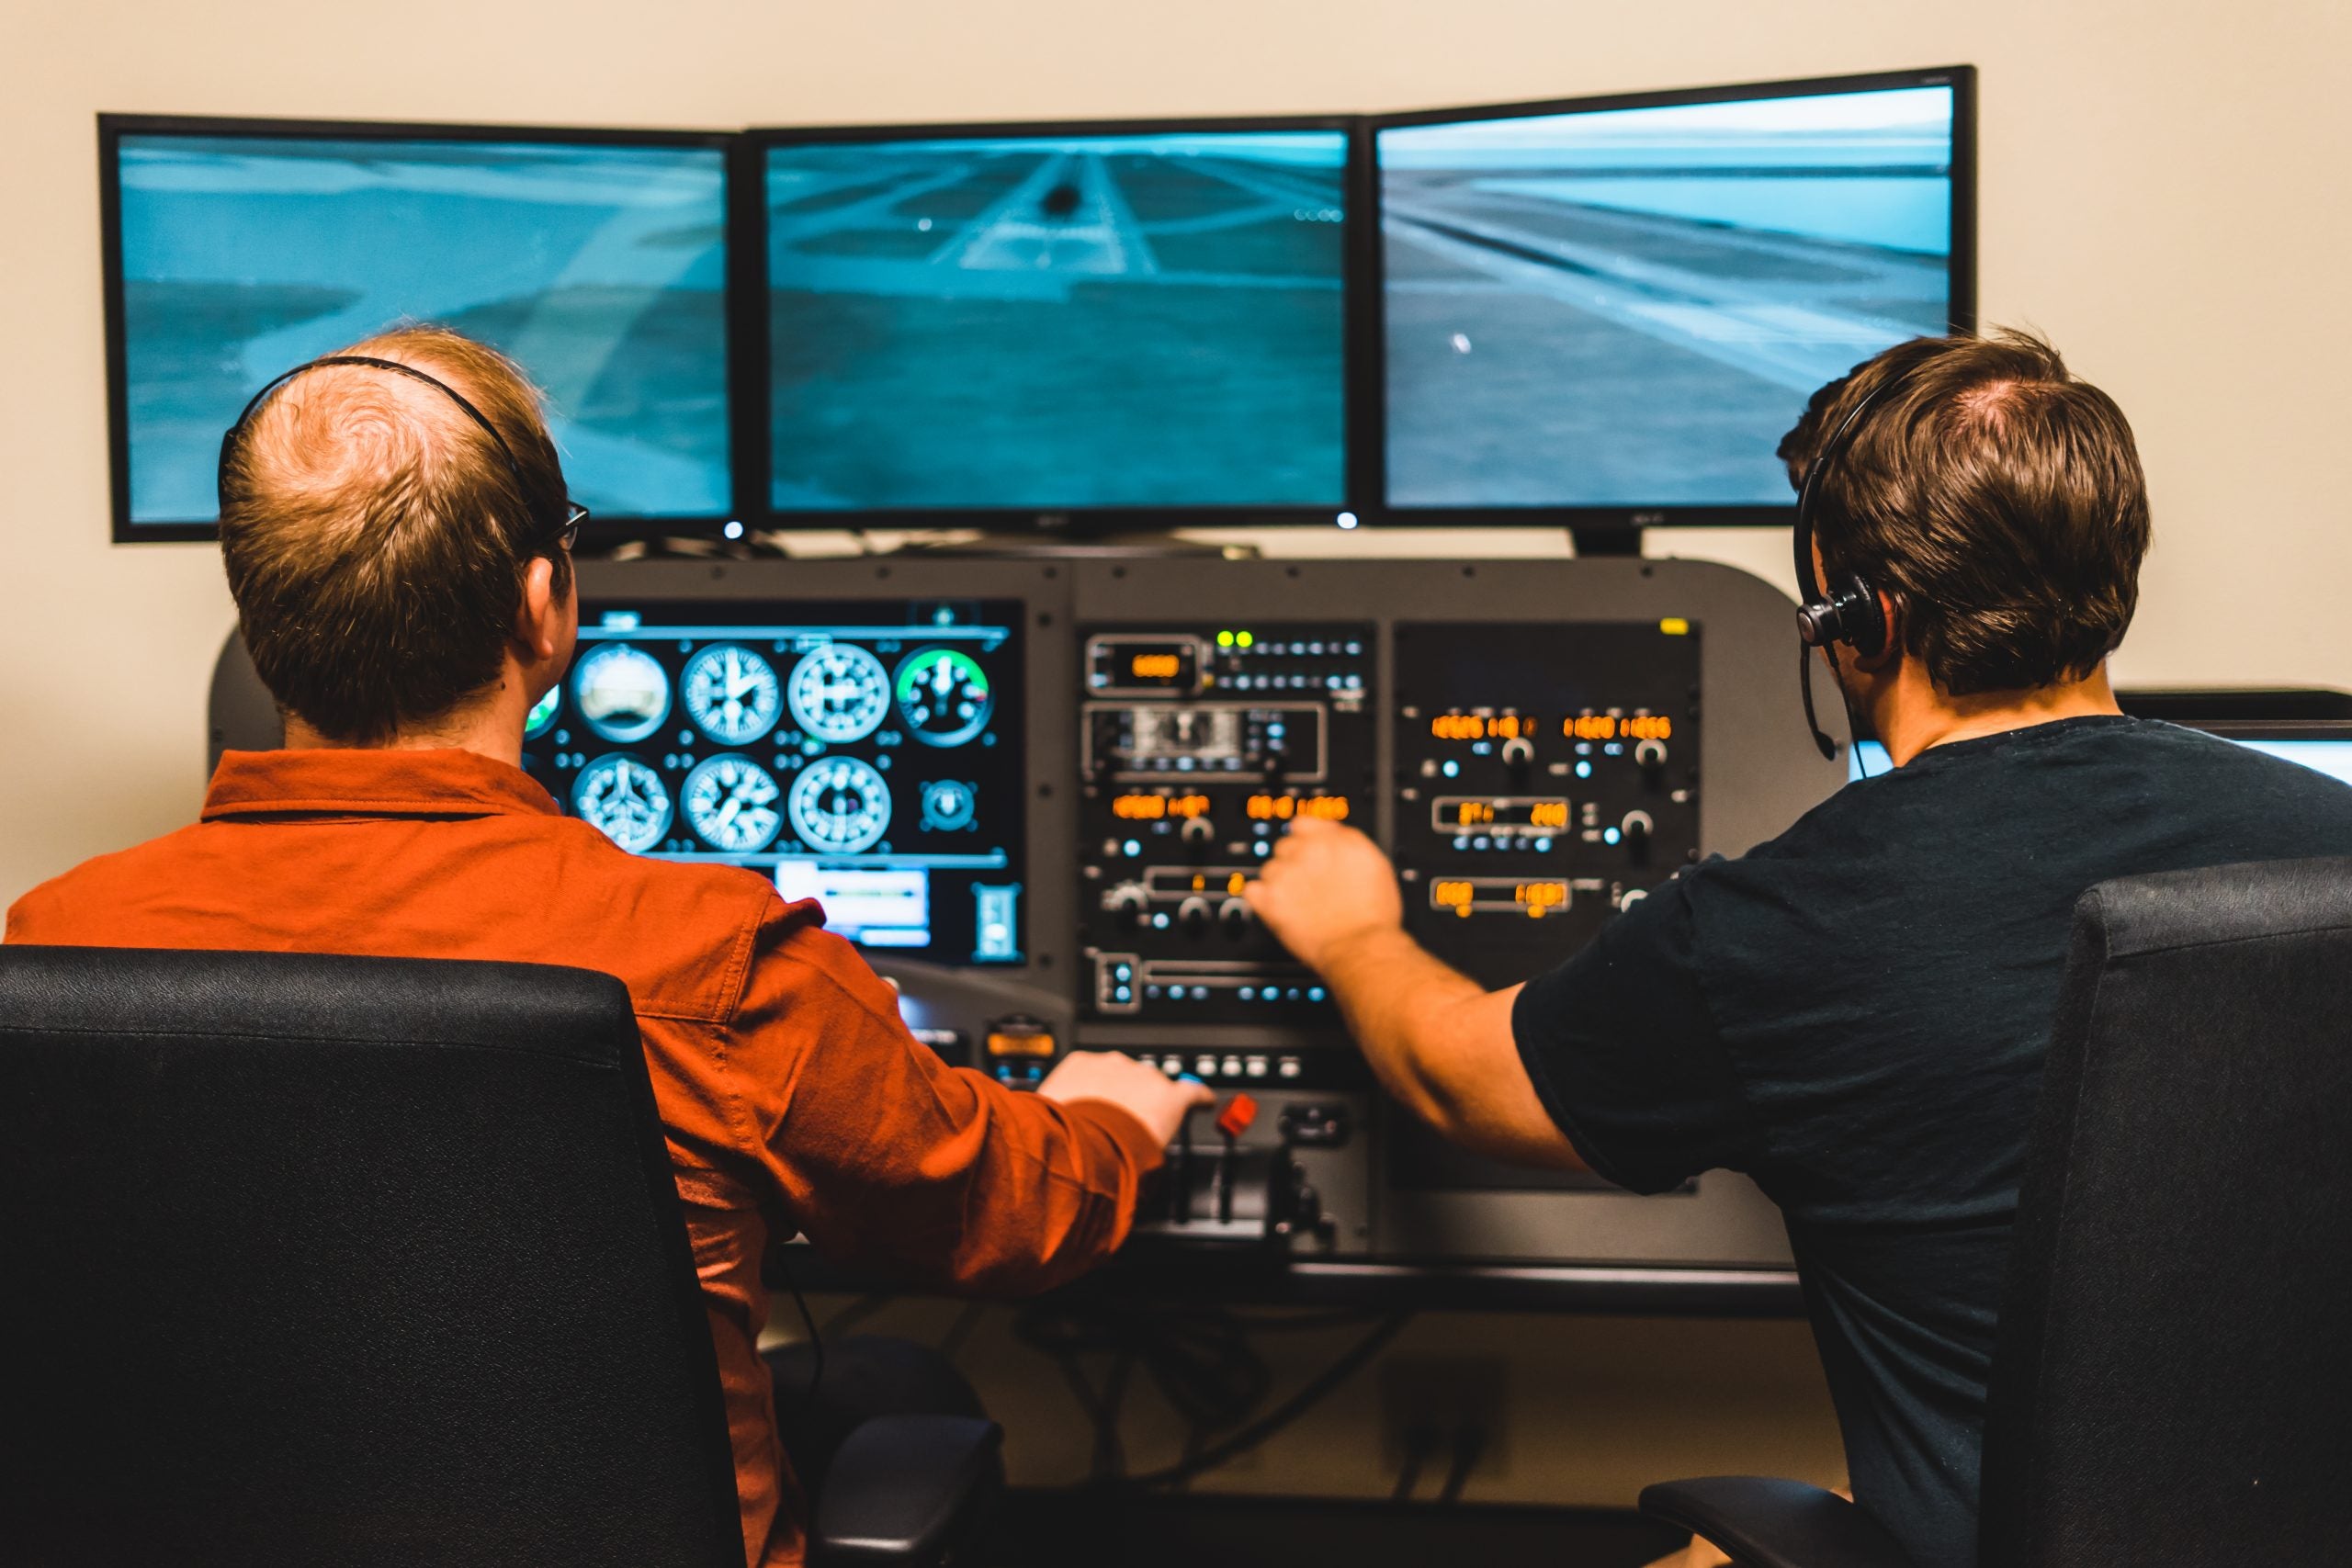 Want to Save on Training? Make Better Use of Flight Simulation